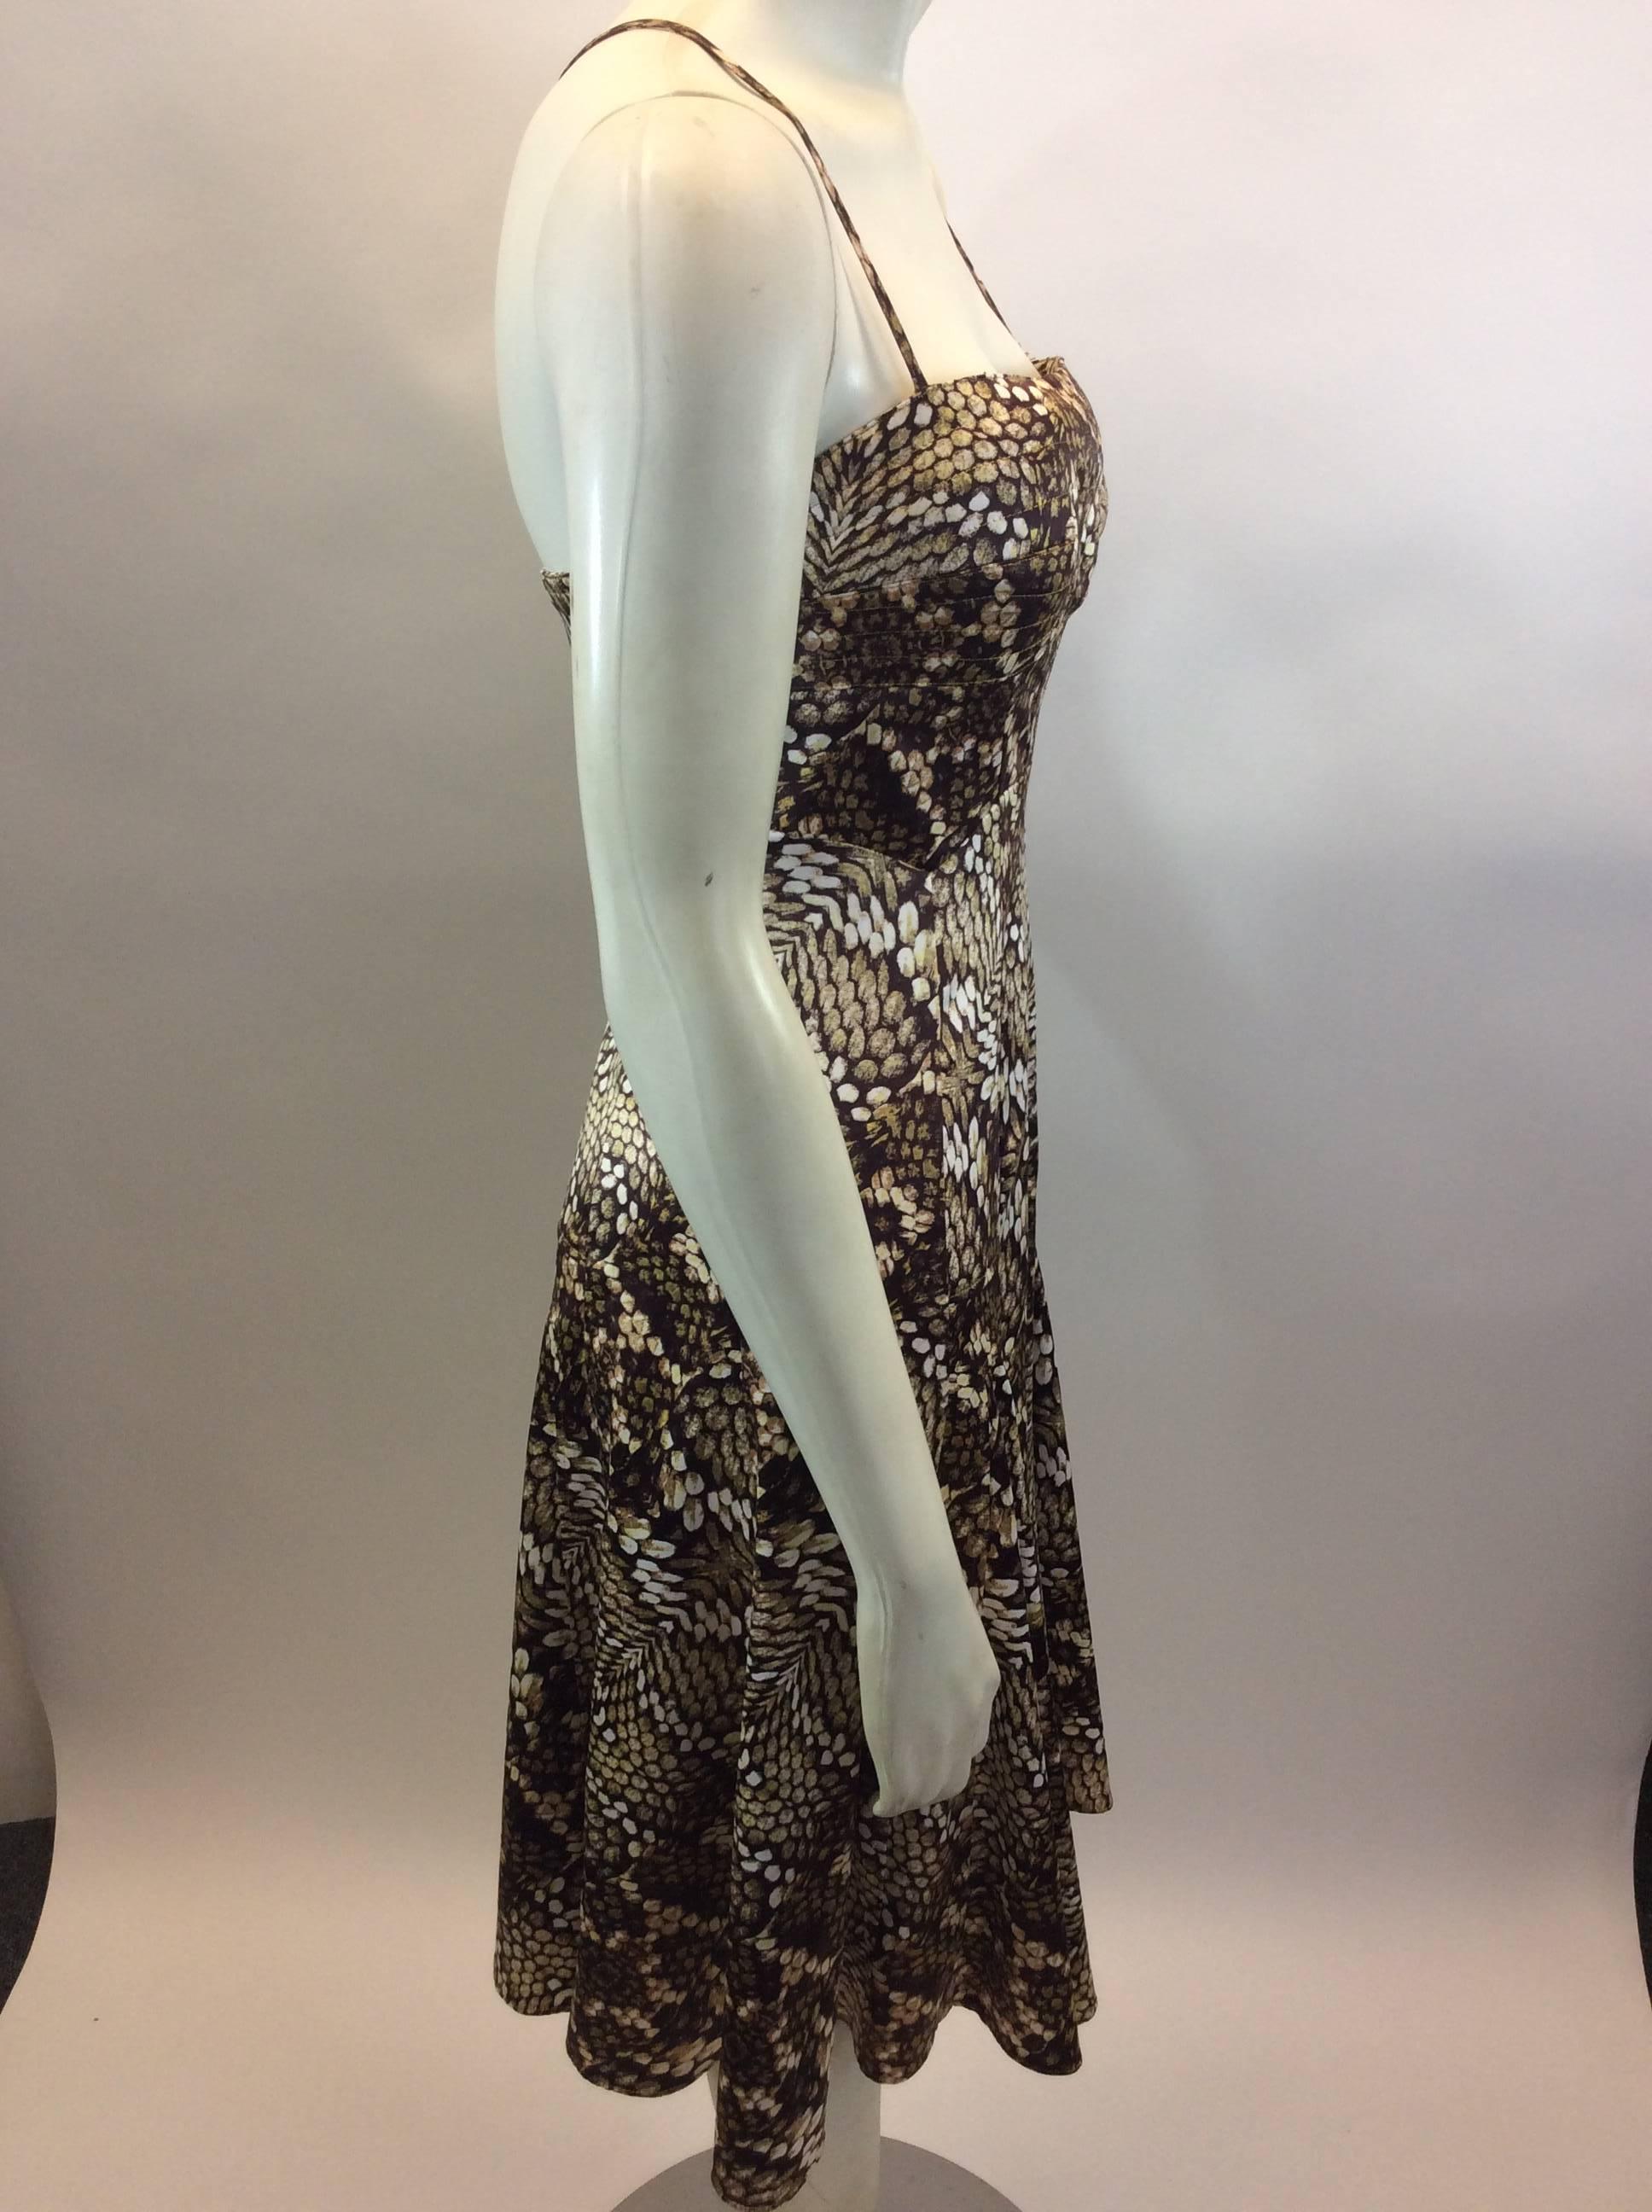 Roberto Cavalli Brown Print Dress In Excellent Condition For Sale In Narberth, PA